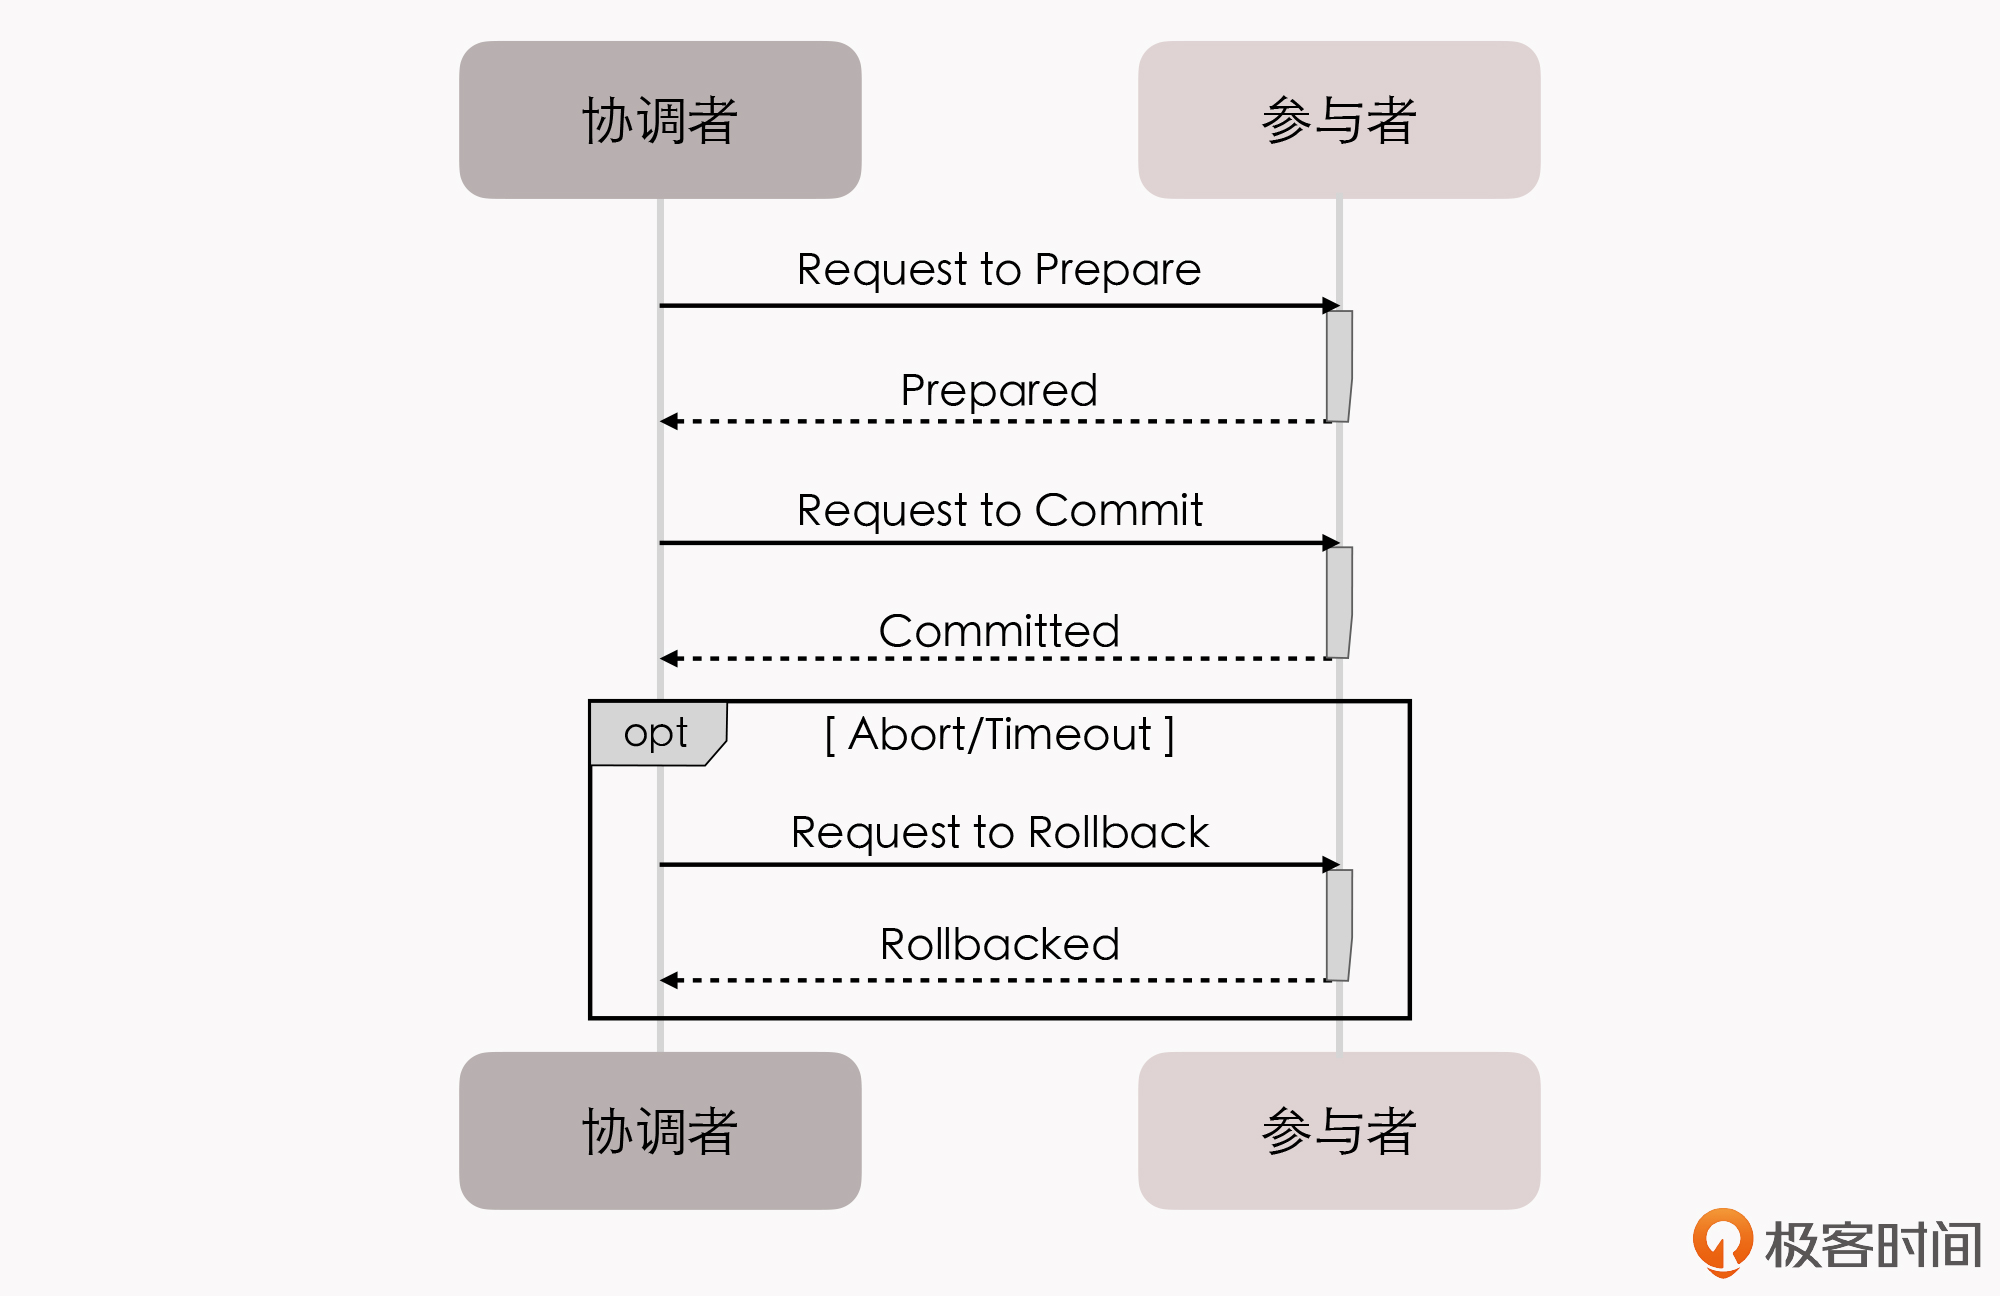 https://img.zhaoweiguo.com/knowledge/images/architectures/distributes/transaction2.jpg